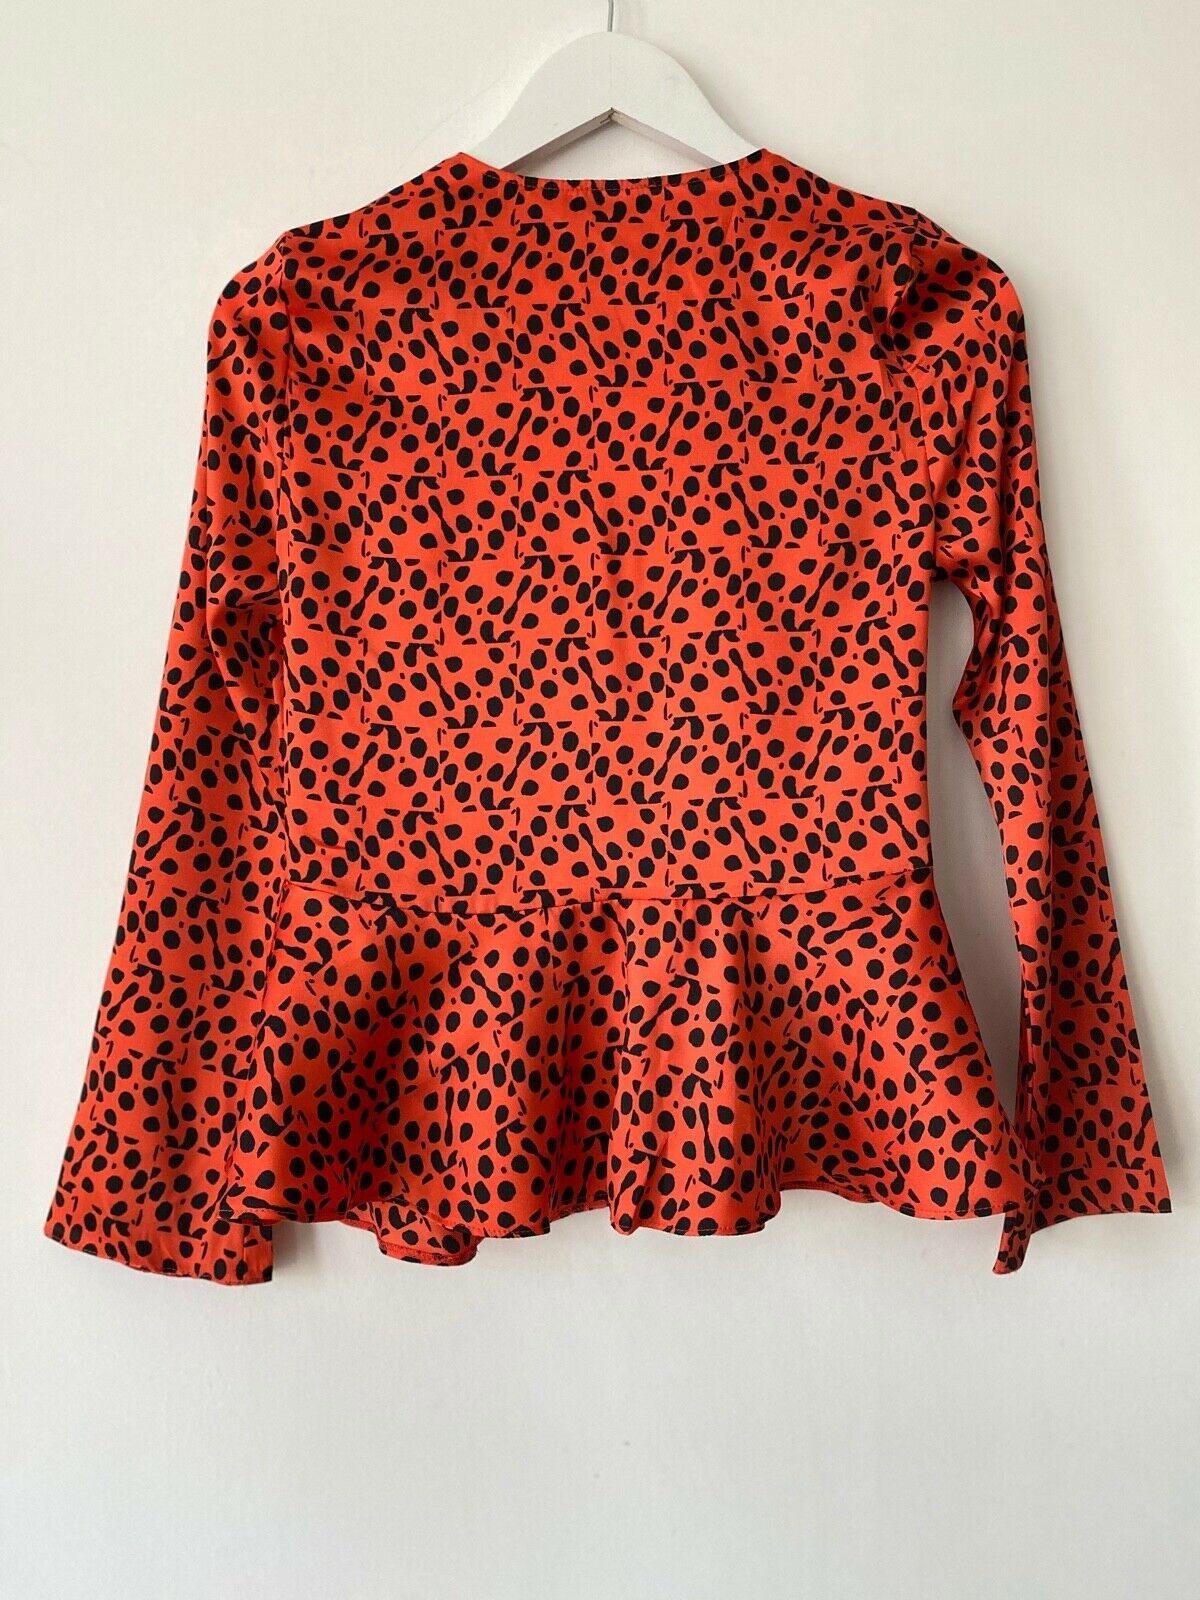 River Island Red Black Knit Front Blouse Size 6